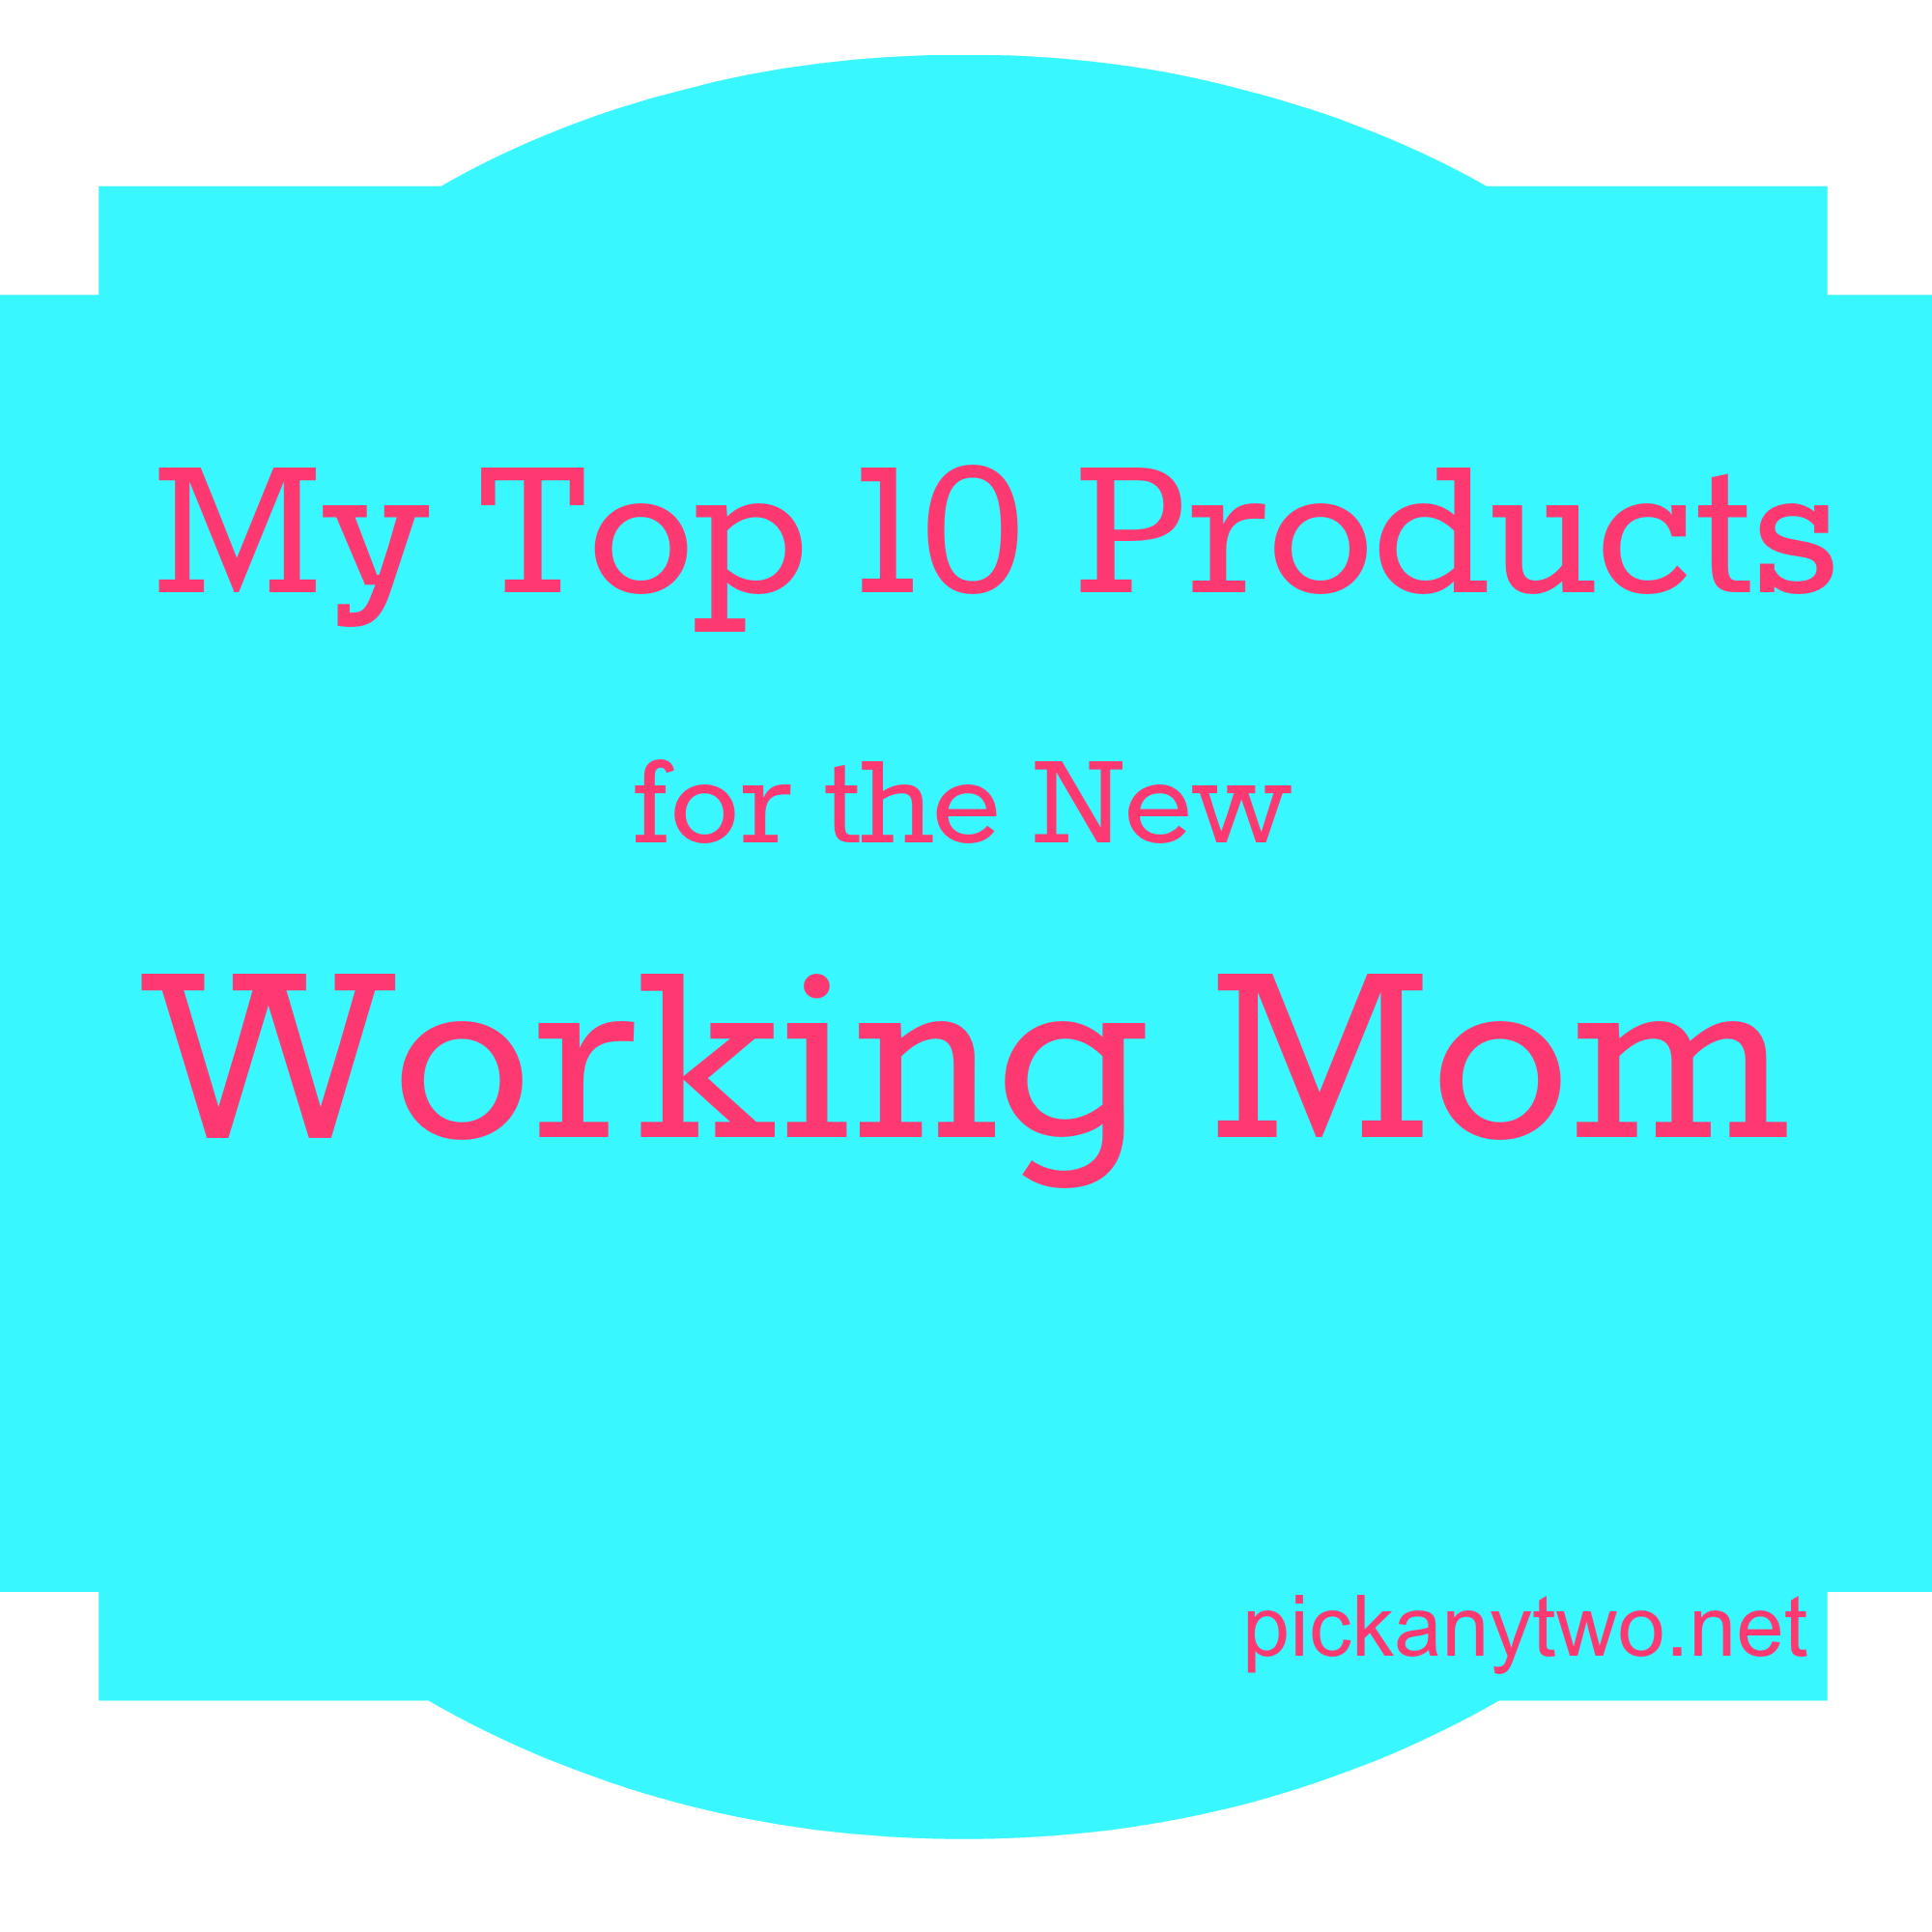 My Top 10 Products for the New Working Mom